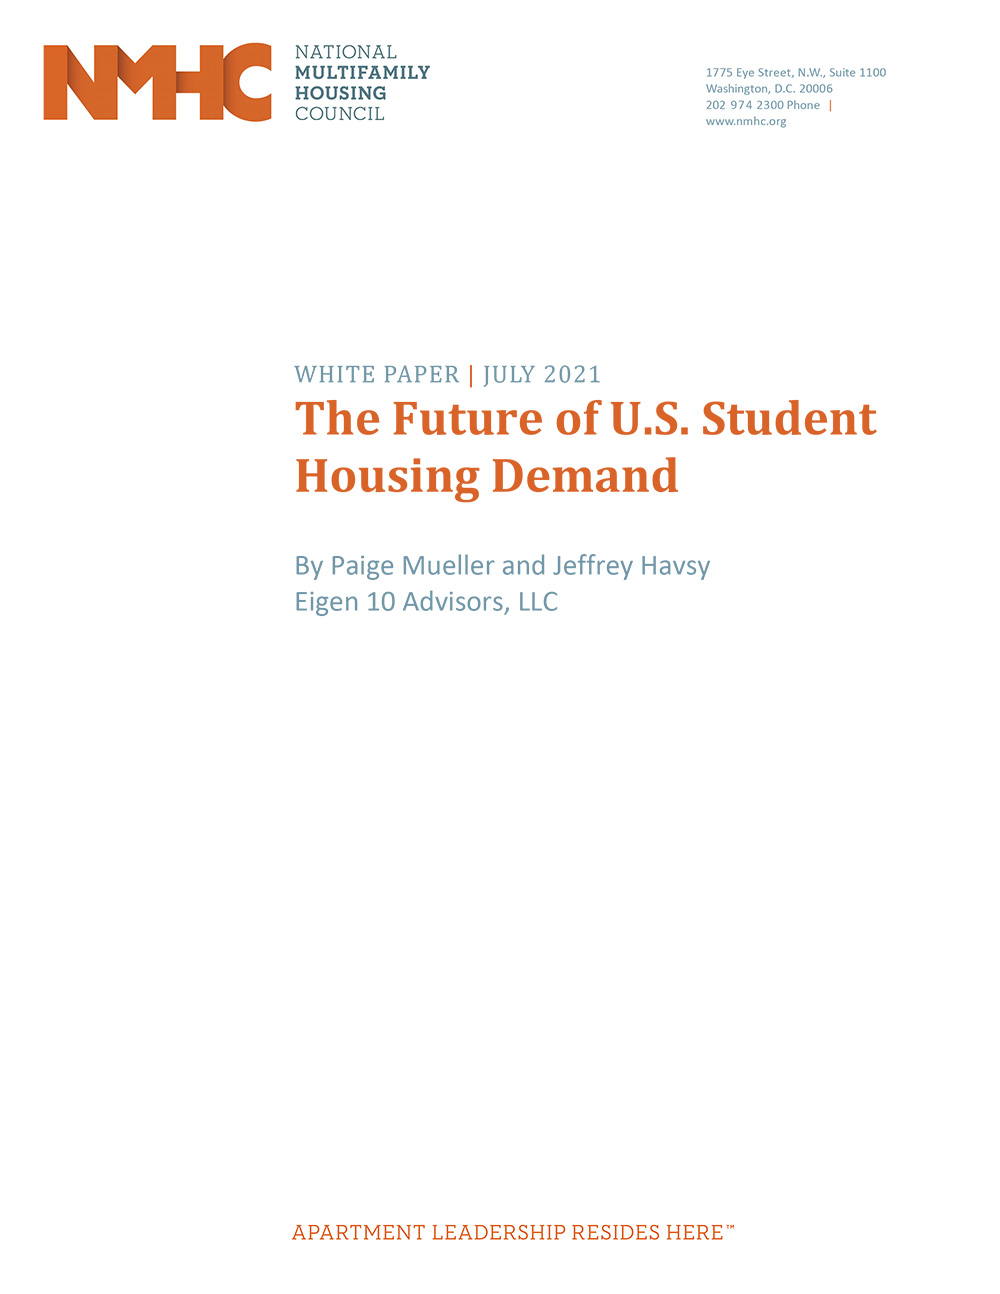 Future of Student Housing Report